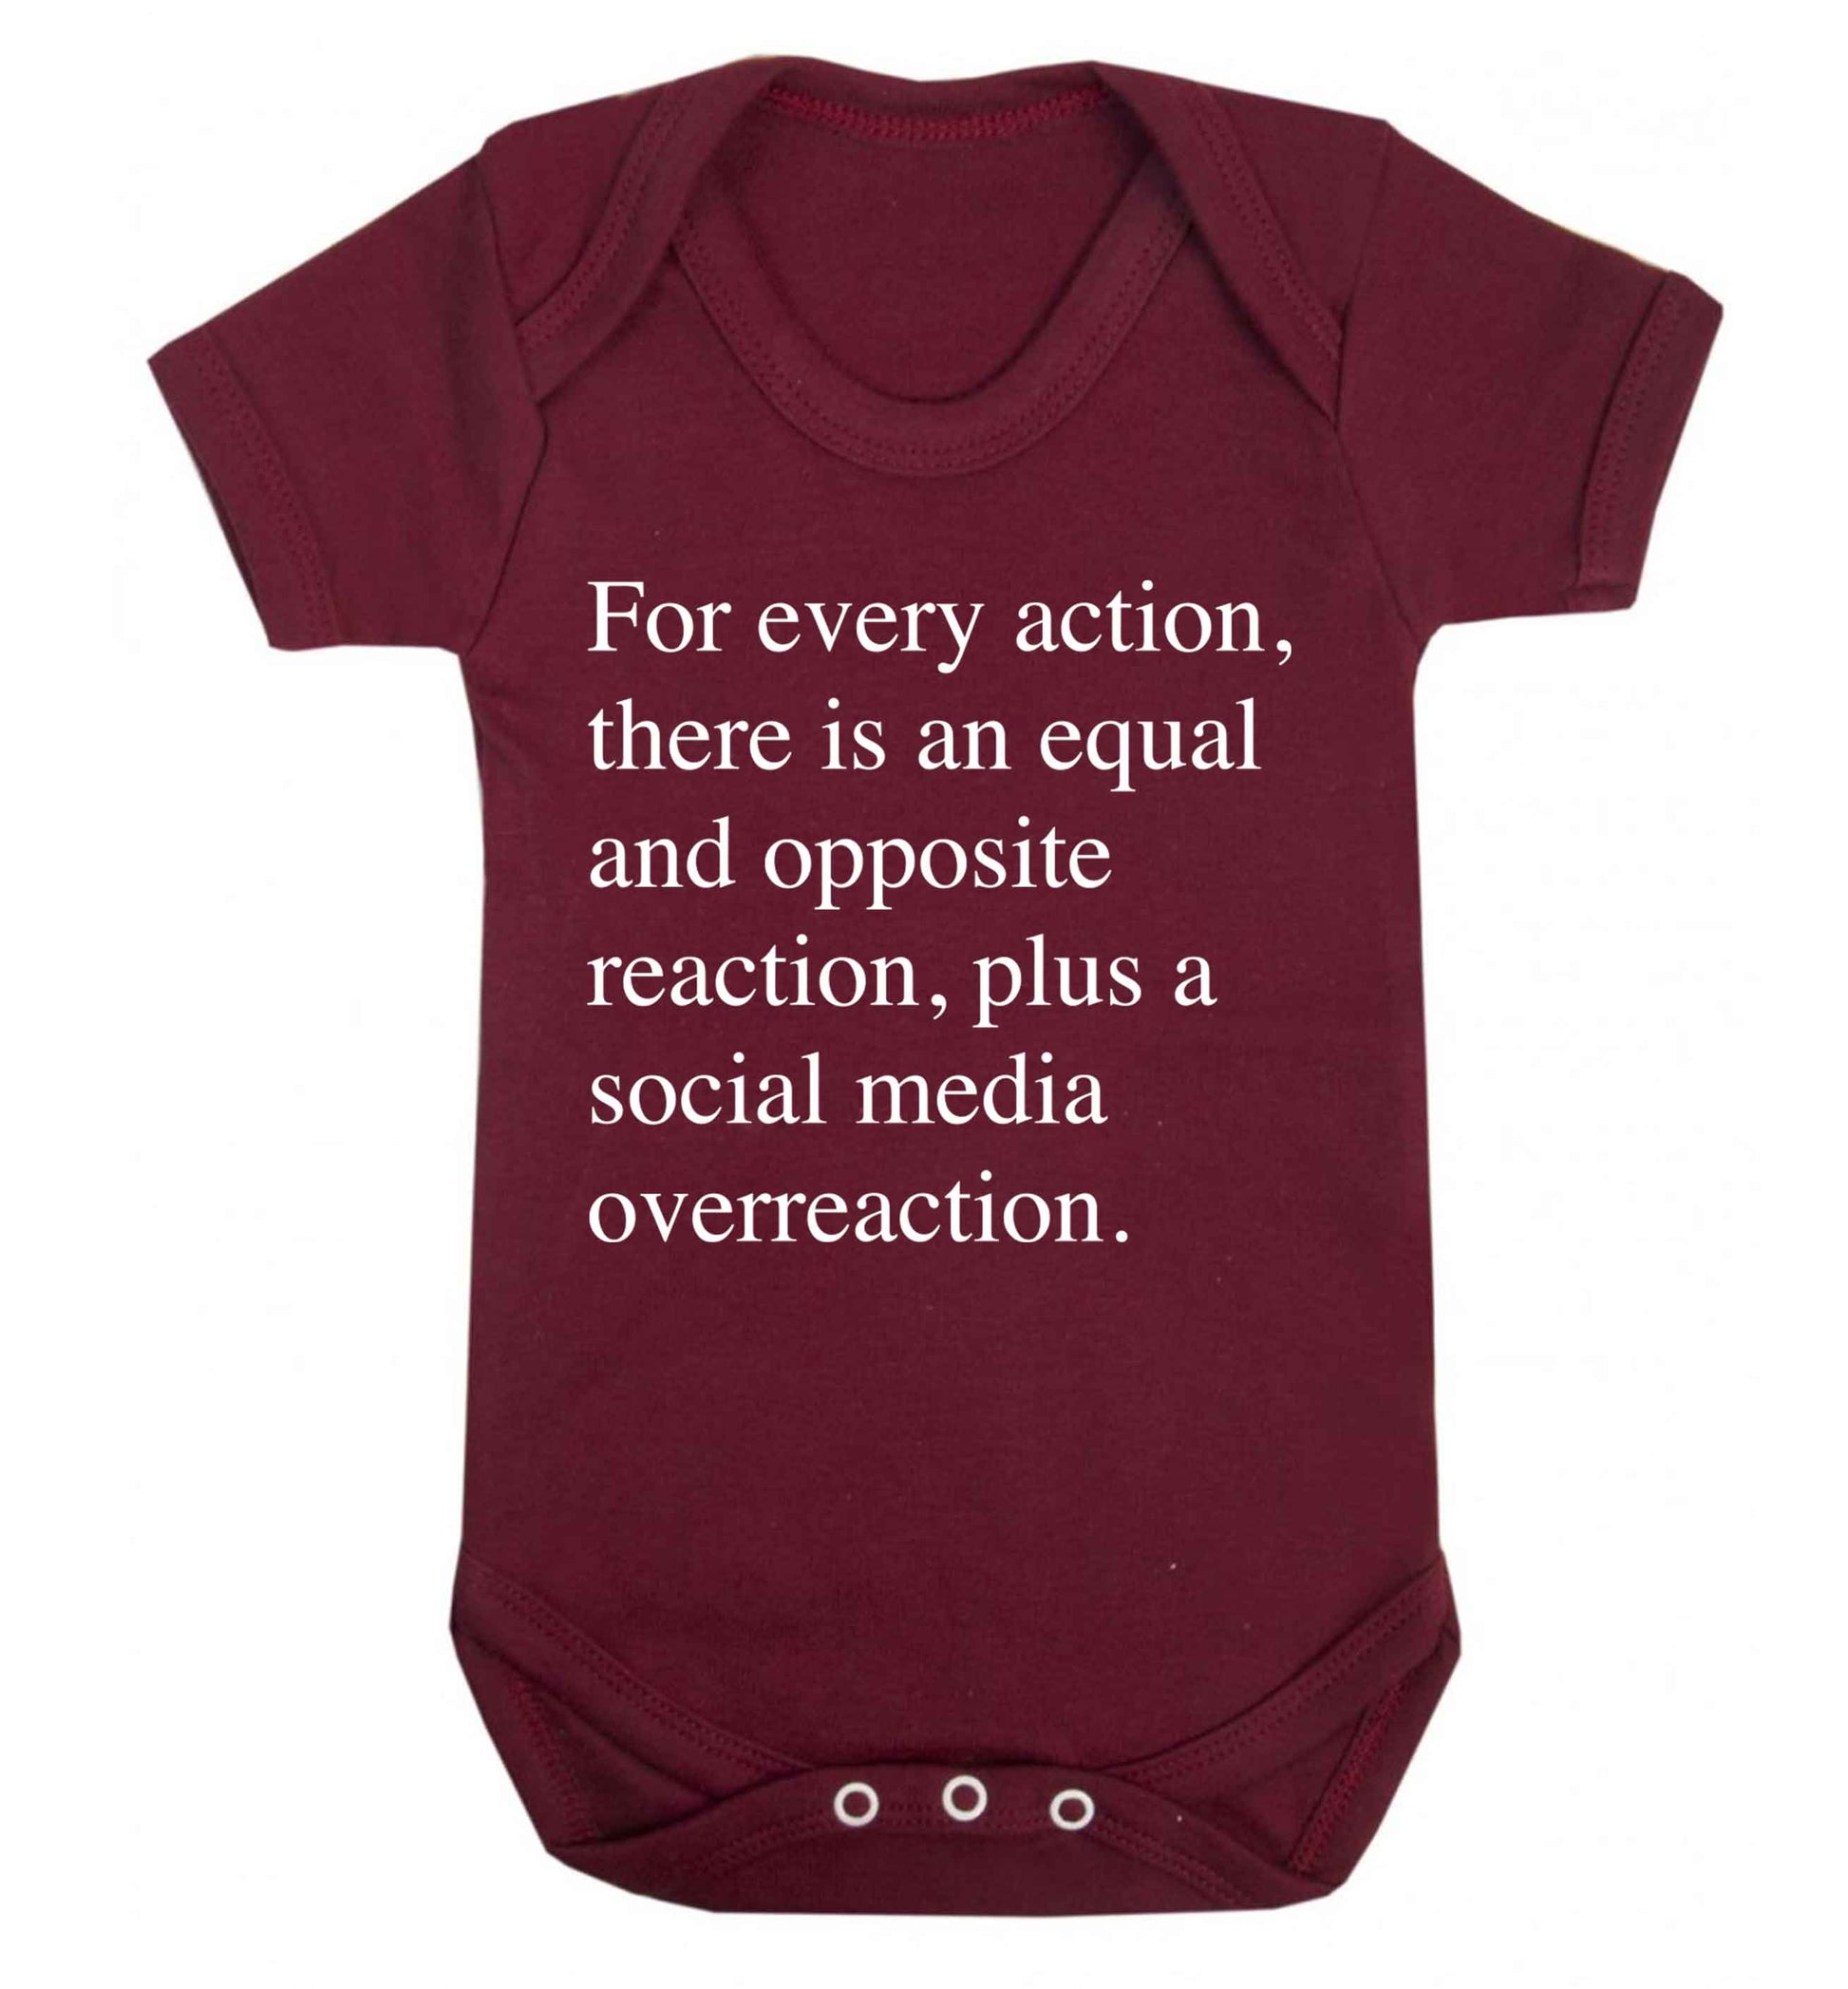 For every action...social media overreaction Baby Vest maroon 18-24 months